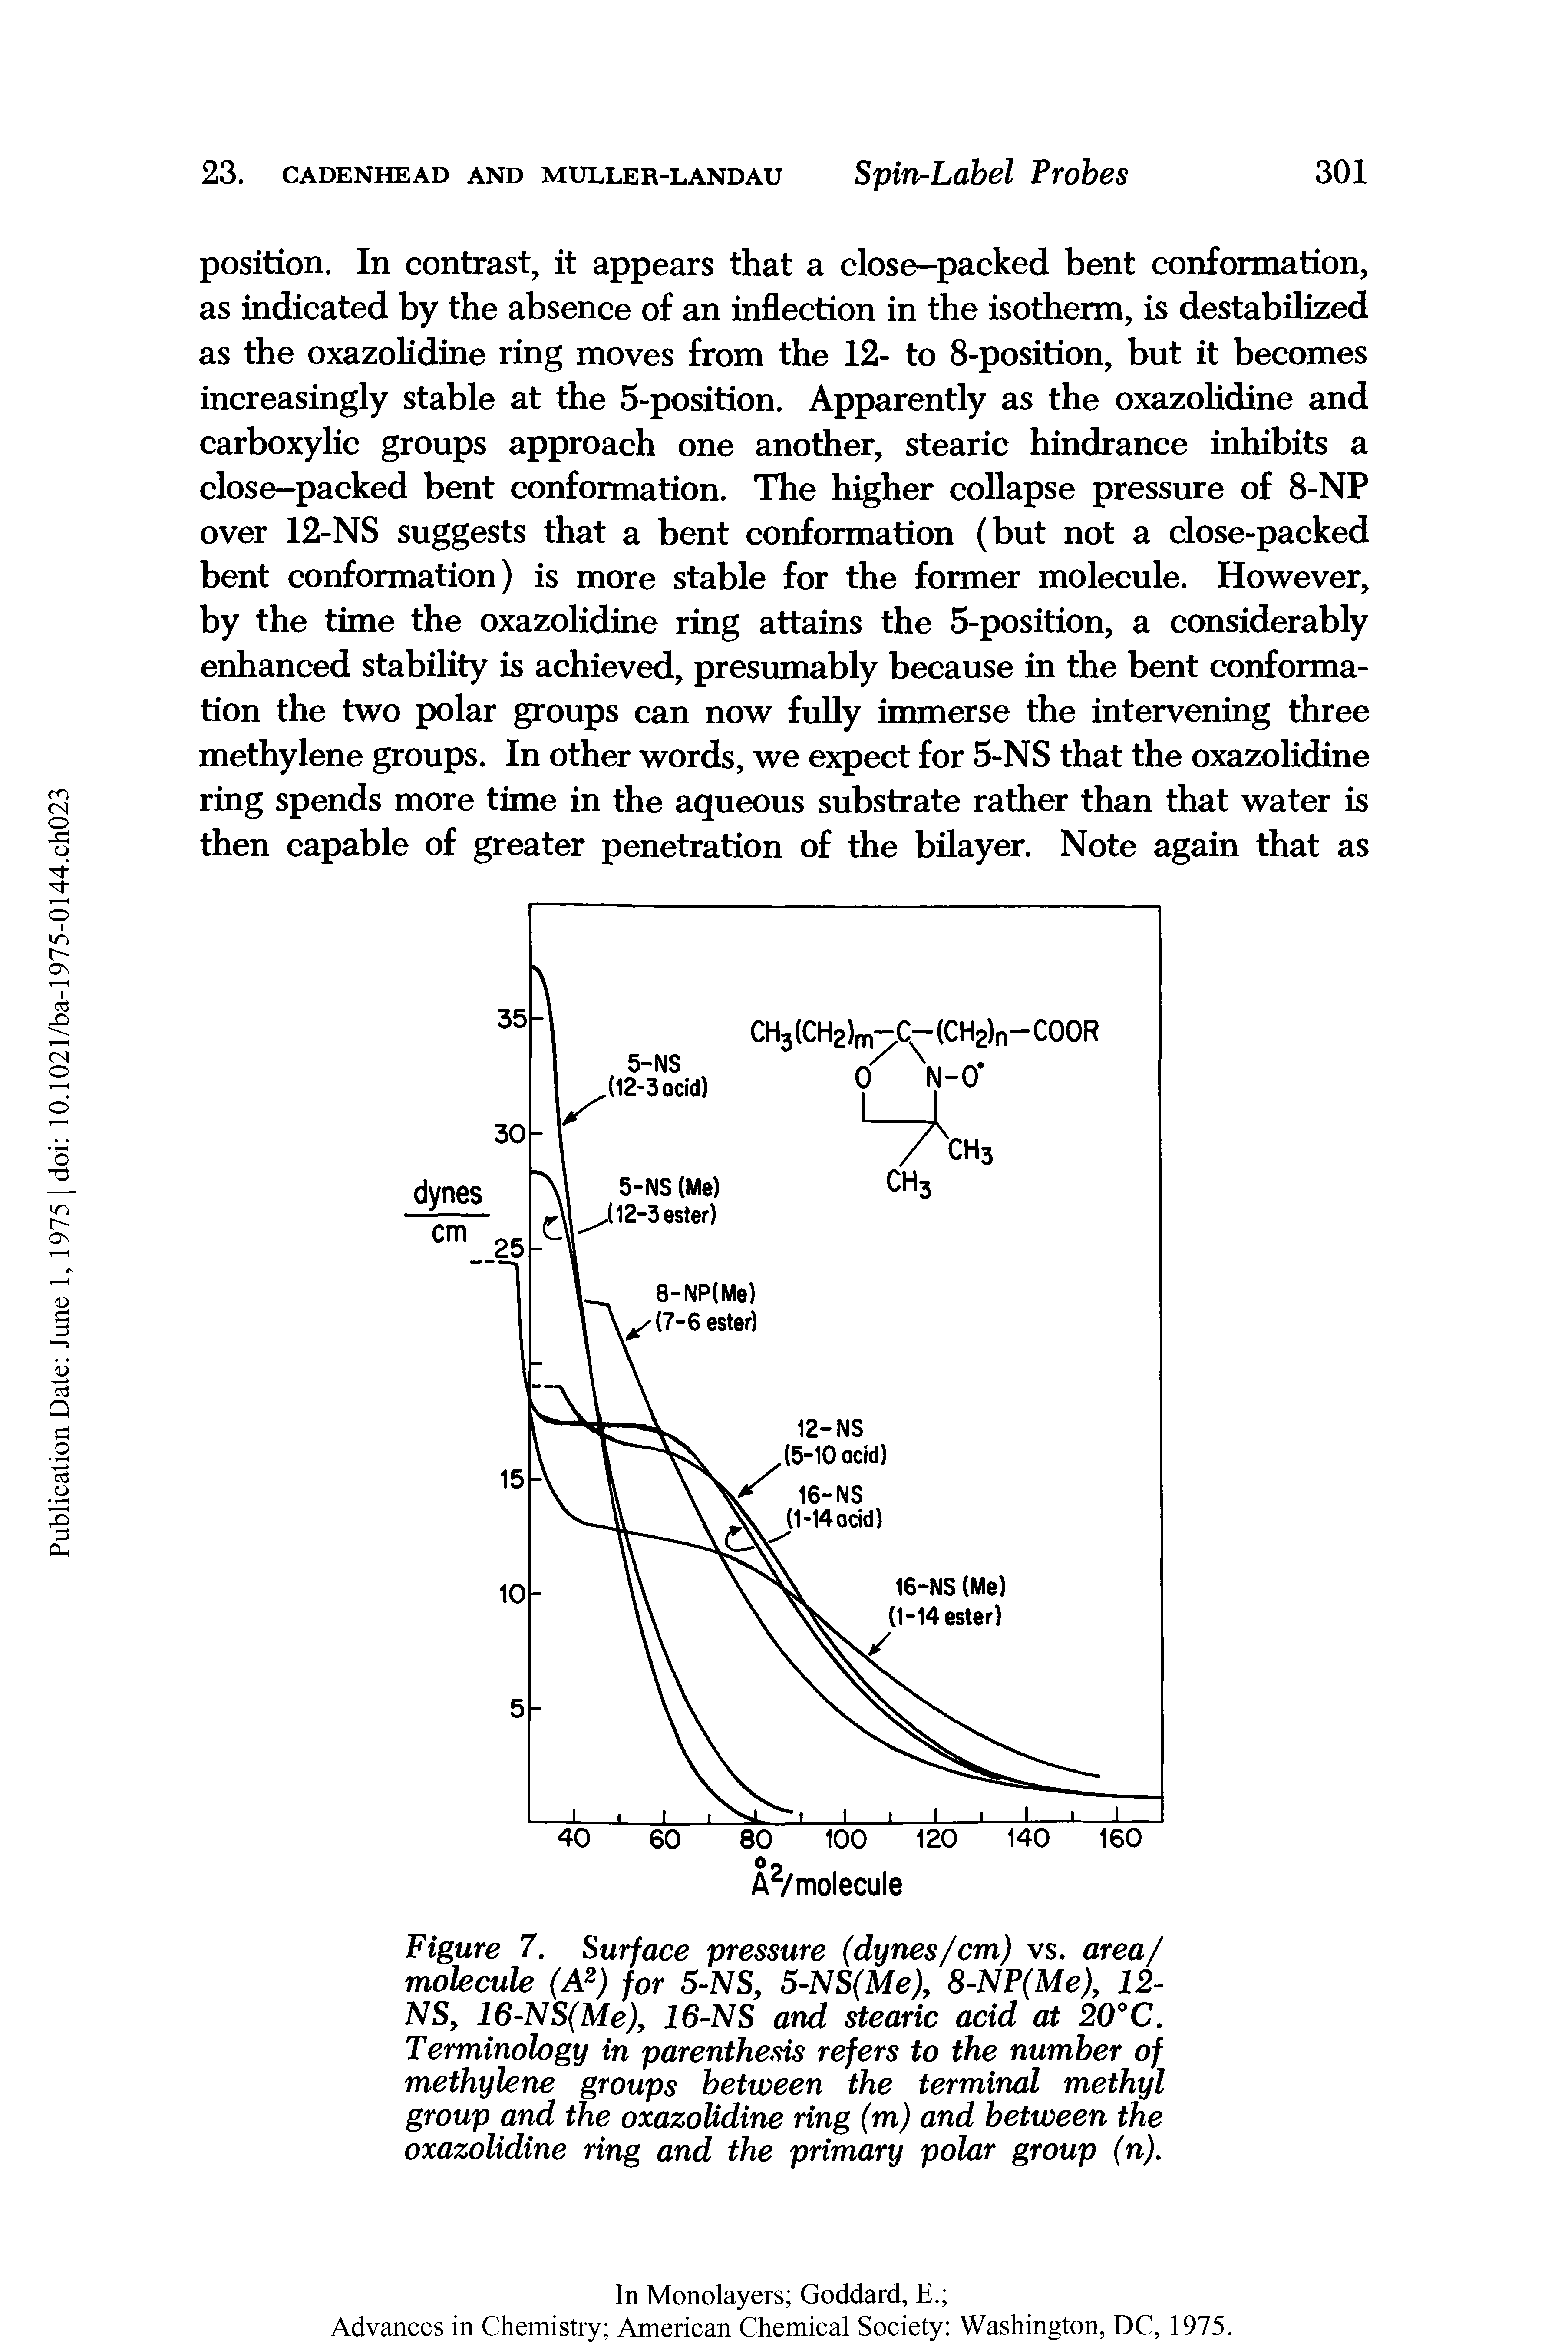 Figure 7. Surface pressure (dynes/cm) vs. area/ molecule (A2) for 5-NS, 5-NS(Me)y 8-N (Me)y 12-NS, 16-NS(Me)y 16-NS and stearic acid at 20°C. Terminology in parenthesis refers to the number of methylene groups between the terminal methyl group and the oxazolidine ring (m) and between the oxazolidine ring and the primary polar group (n).